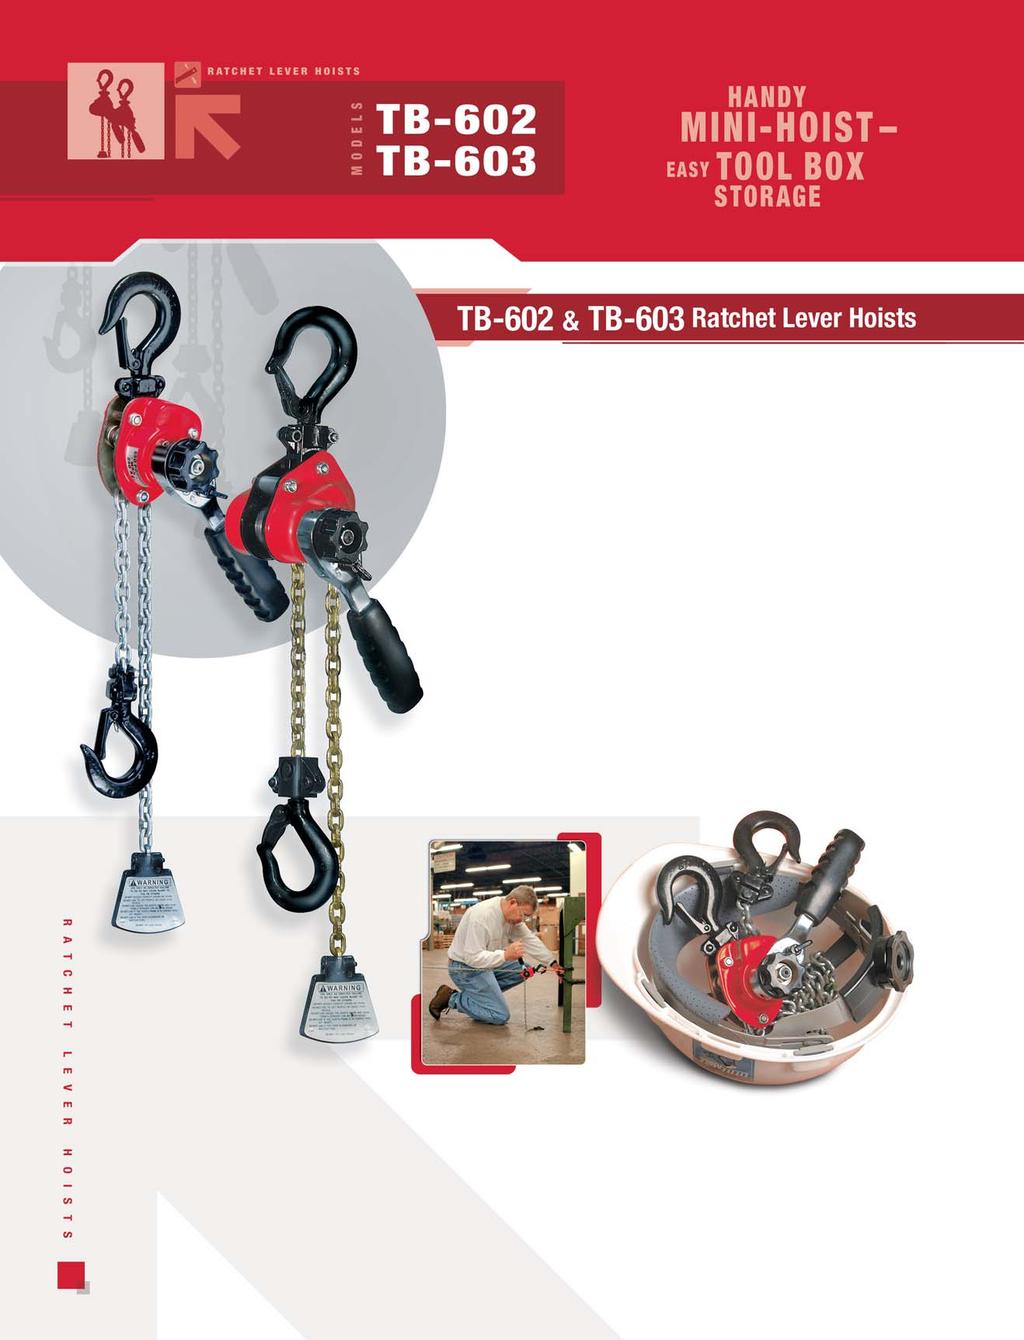 Coffing TB-602 & TB-603 Models - The most compact ratchet lever hoists in the market.